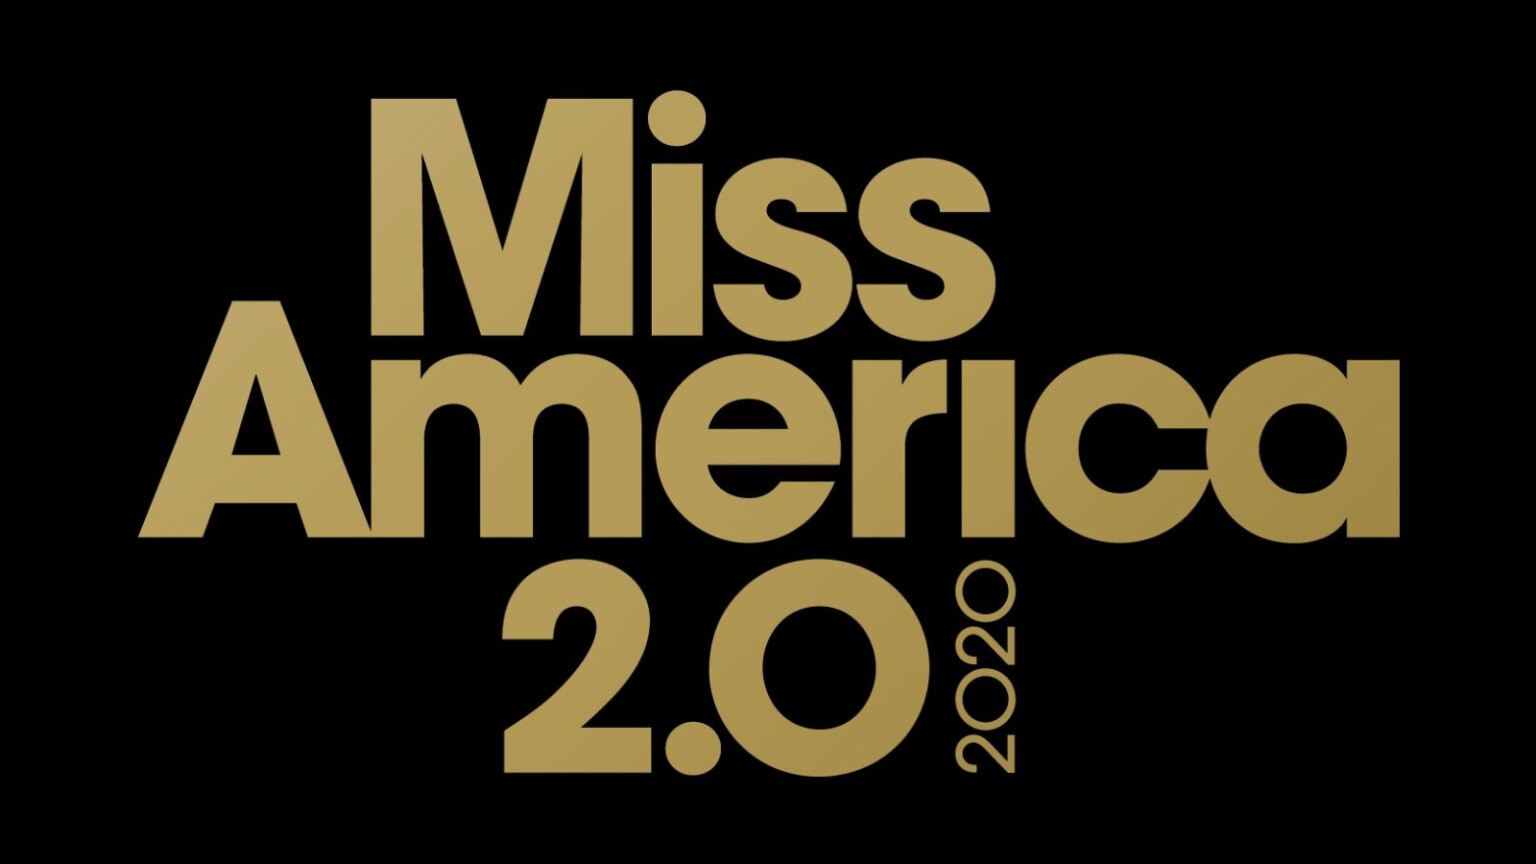 How to Watch 'Miss America 2020' Online Live Stream the Event